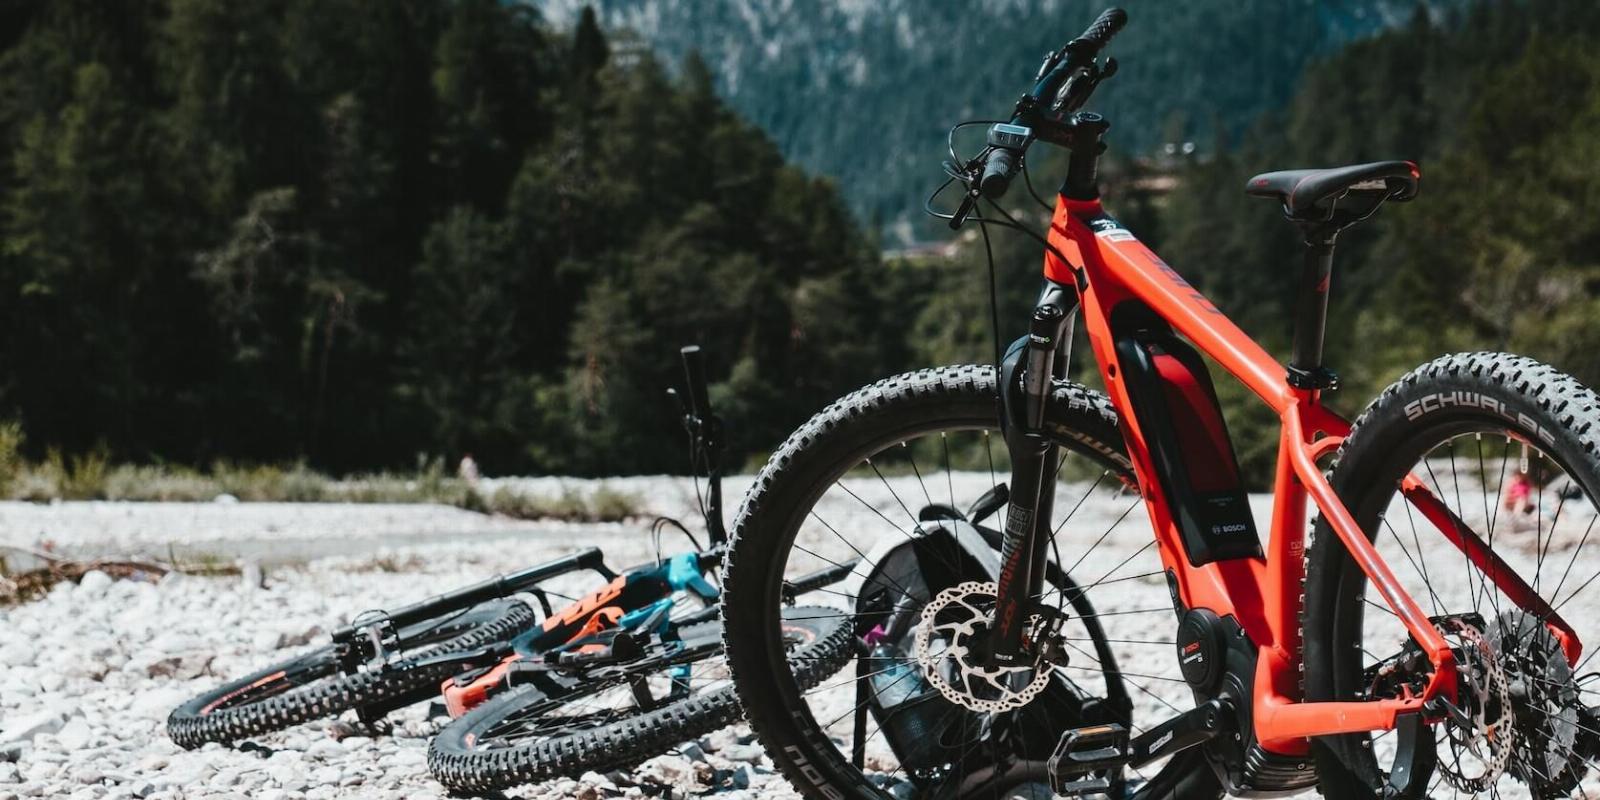 6 Things You Should Know About How to Ride an EBike